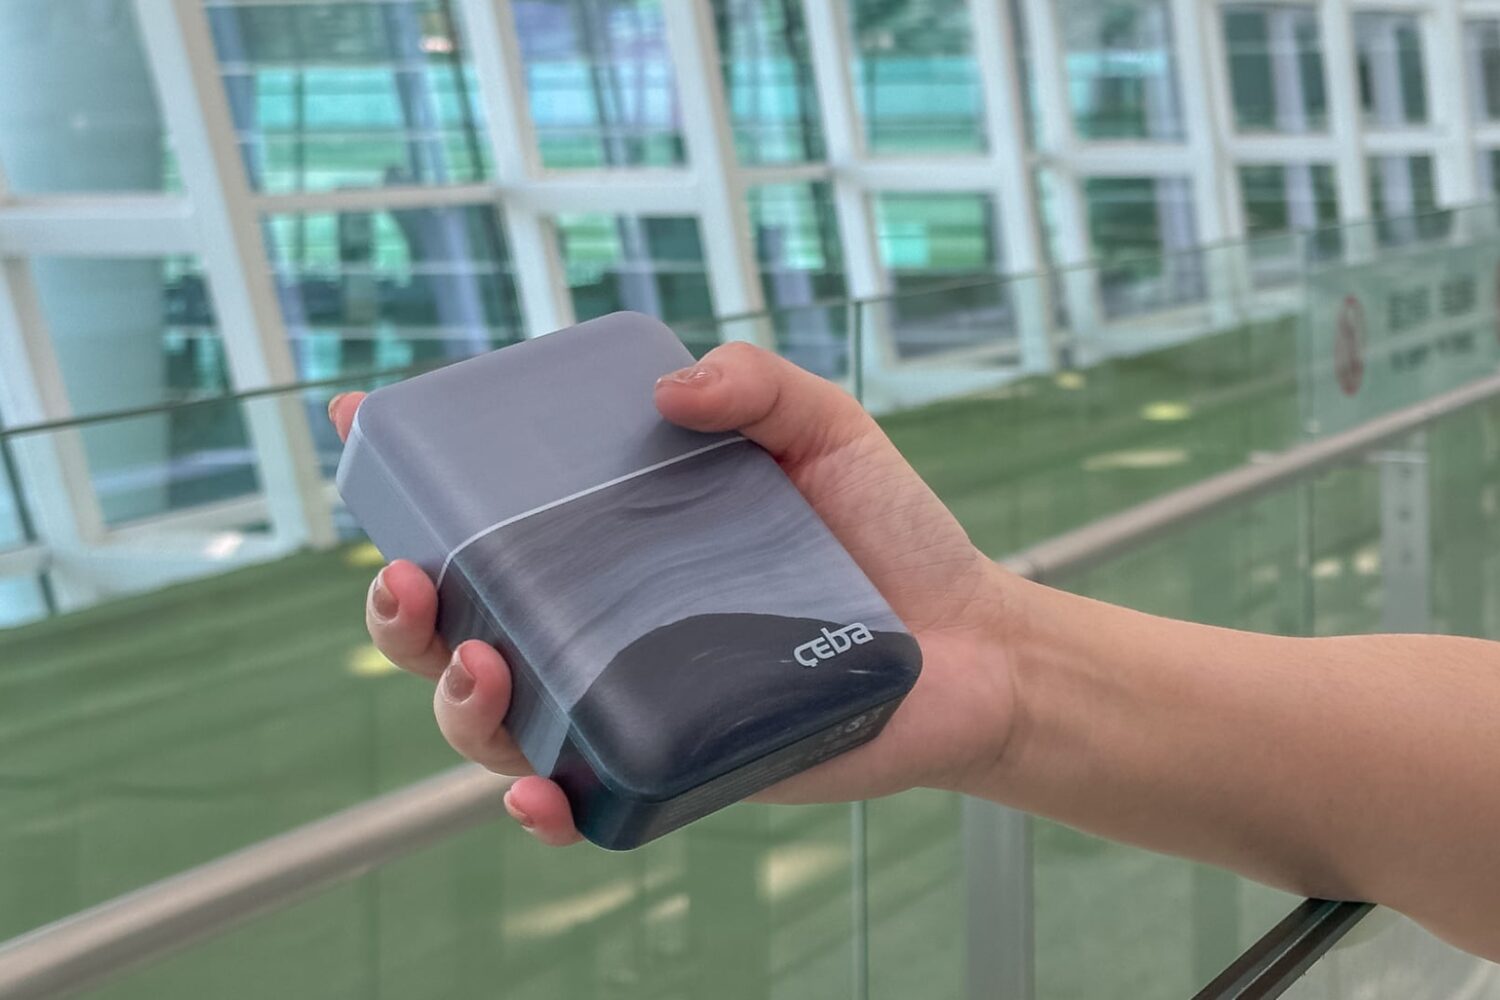 Person's hand holding Ceba RAPI power bank at the airport